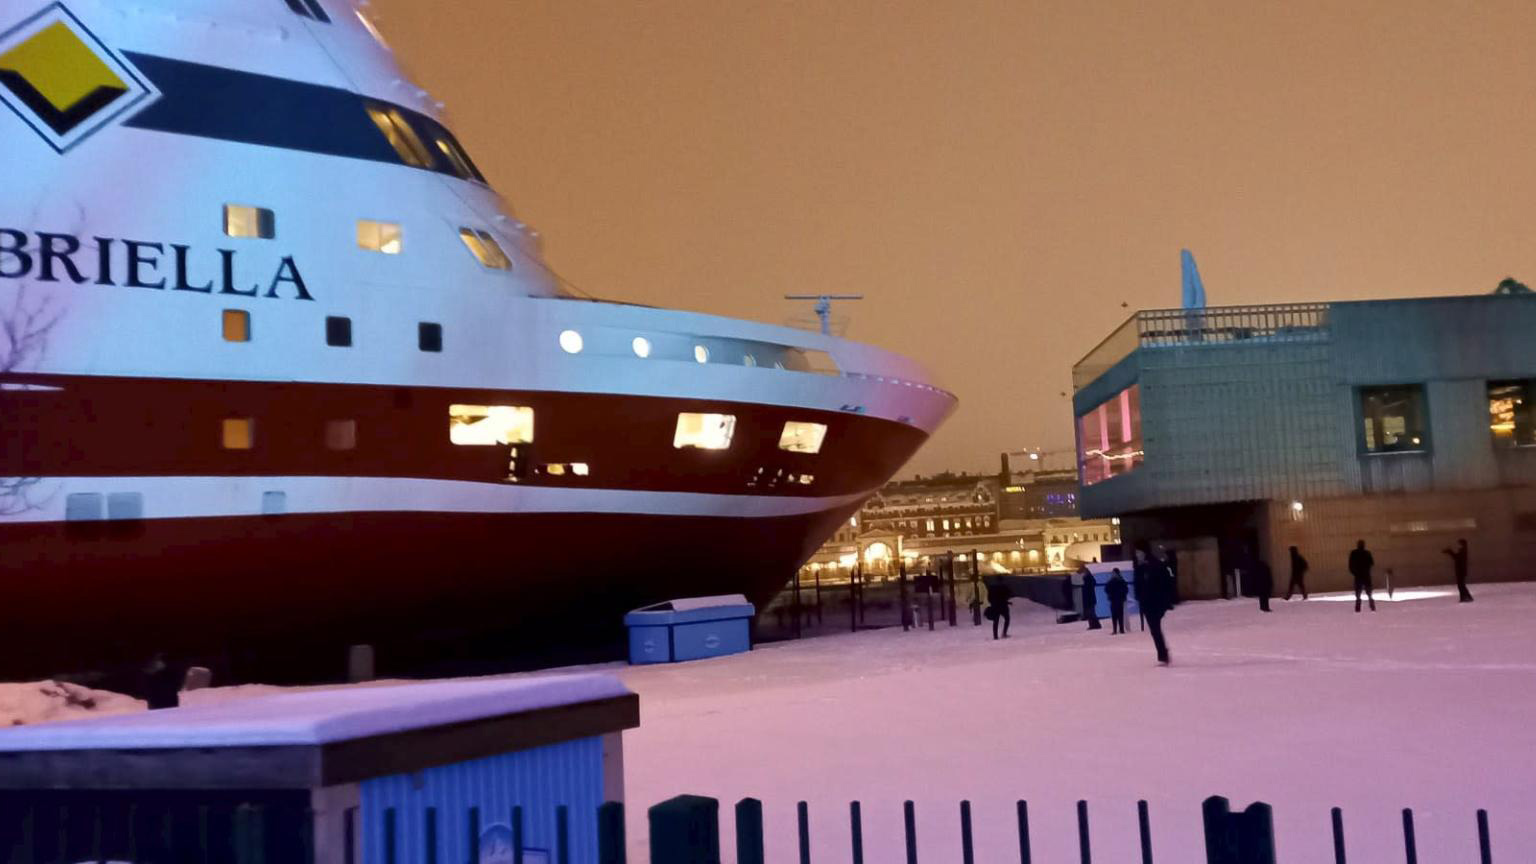 The popular Helsinki seaside pool was damaged in a recent berth collision with Viking Line